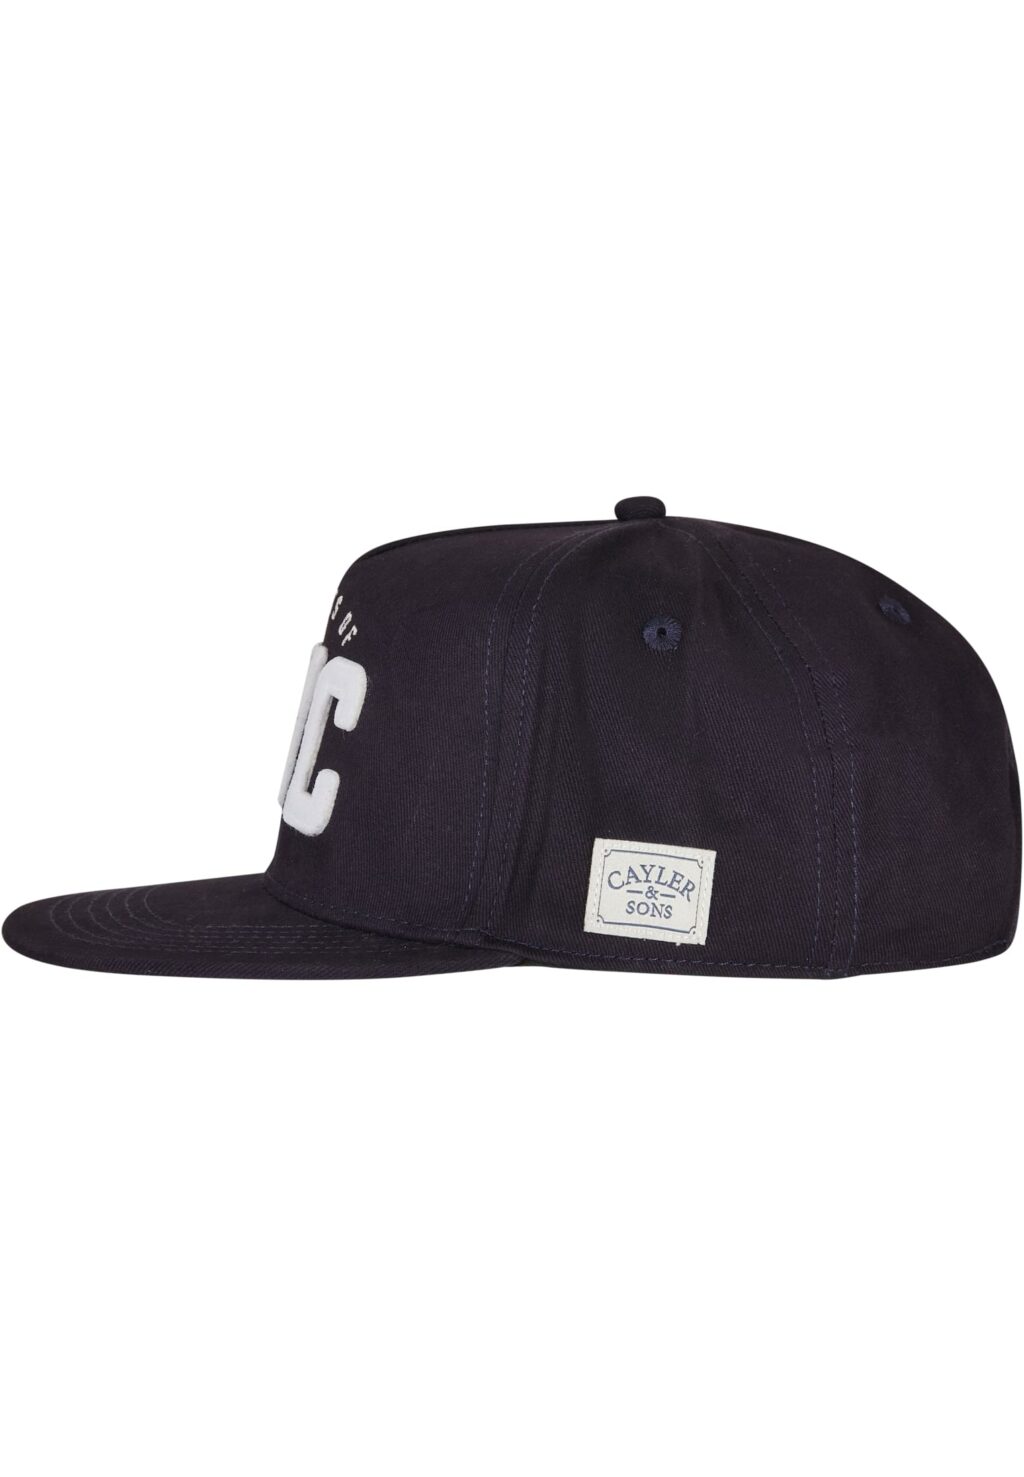 Streets of NYC Cap navy/offwhite one CS3020